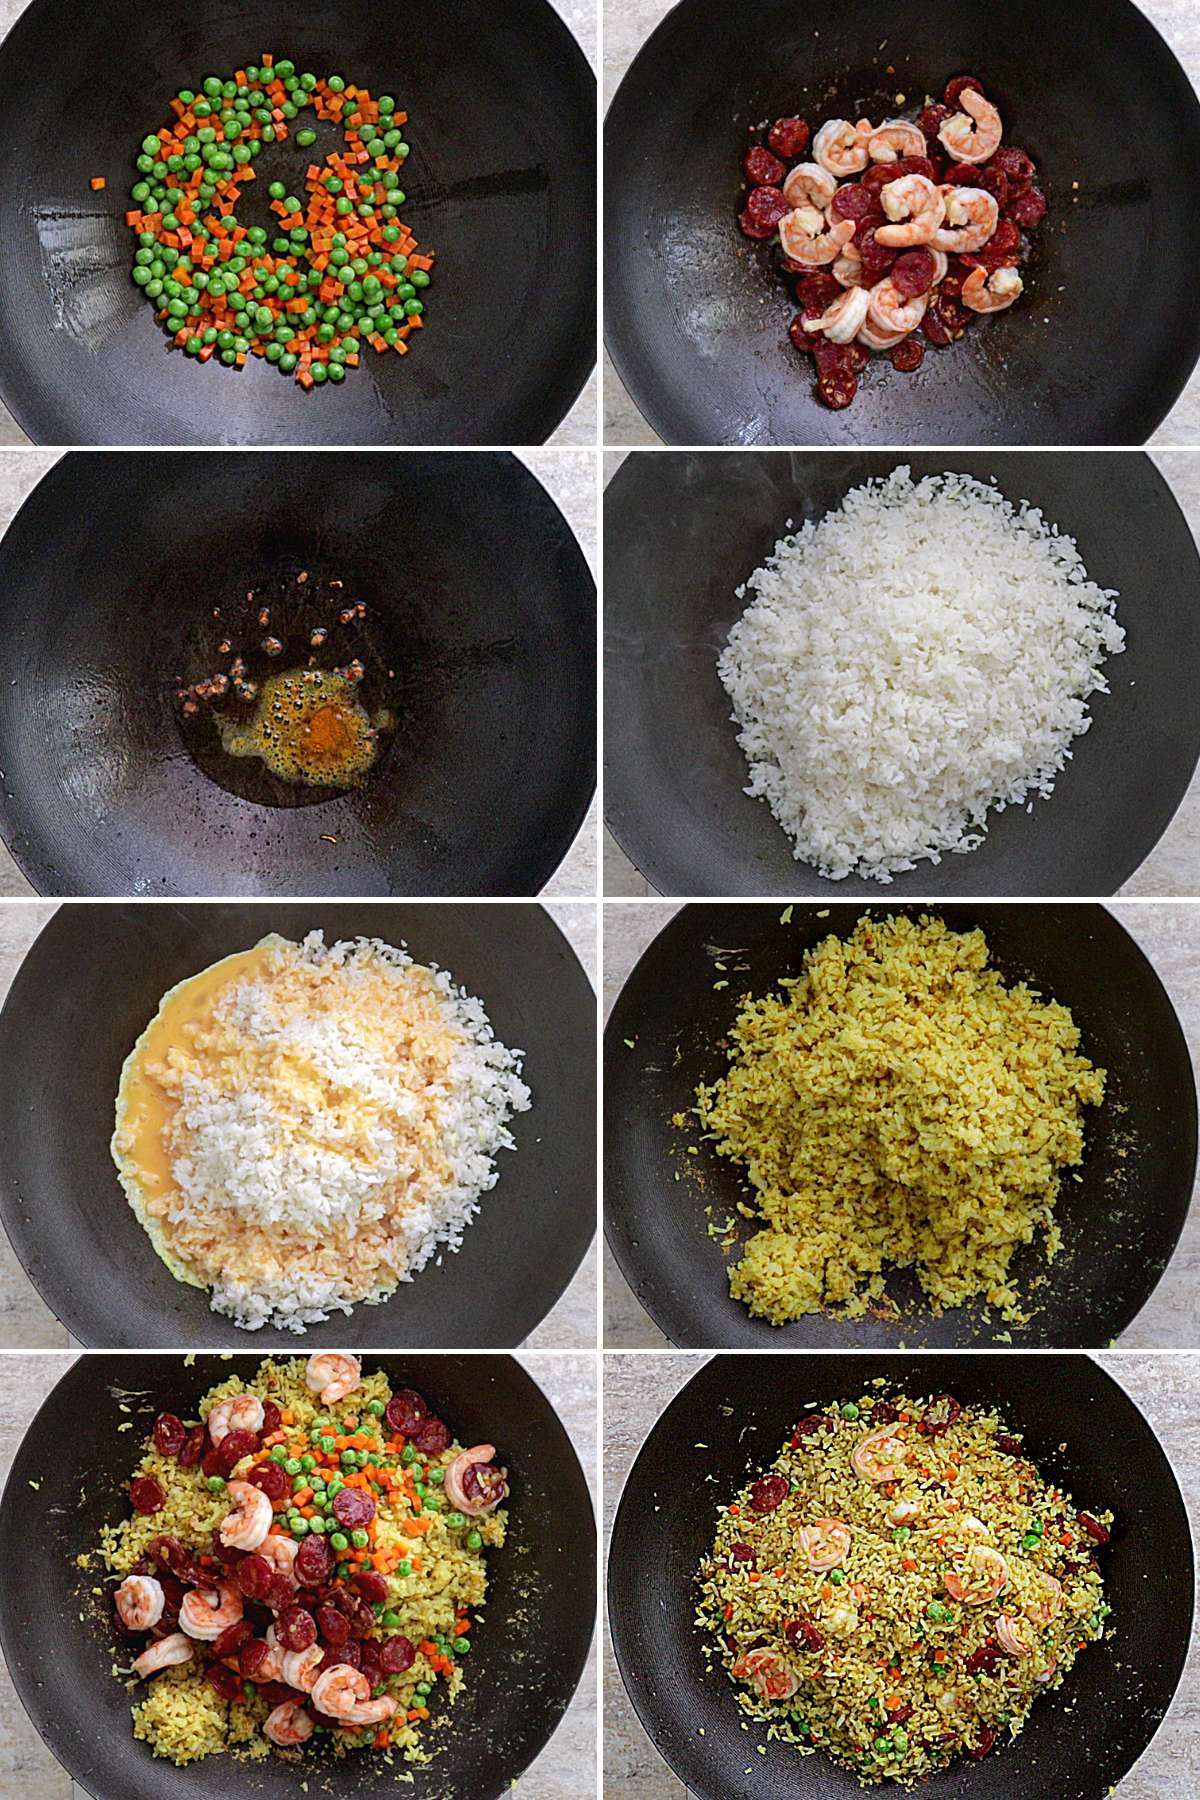 Steps on how to cook Yang Chow.